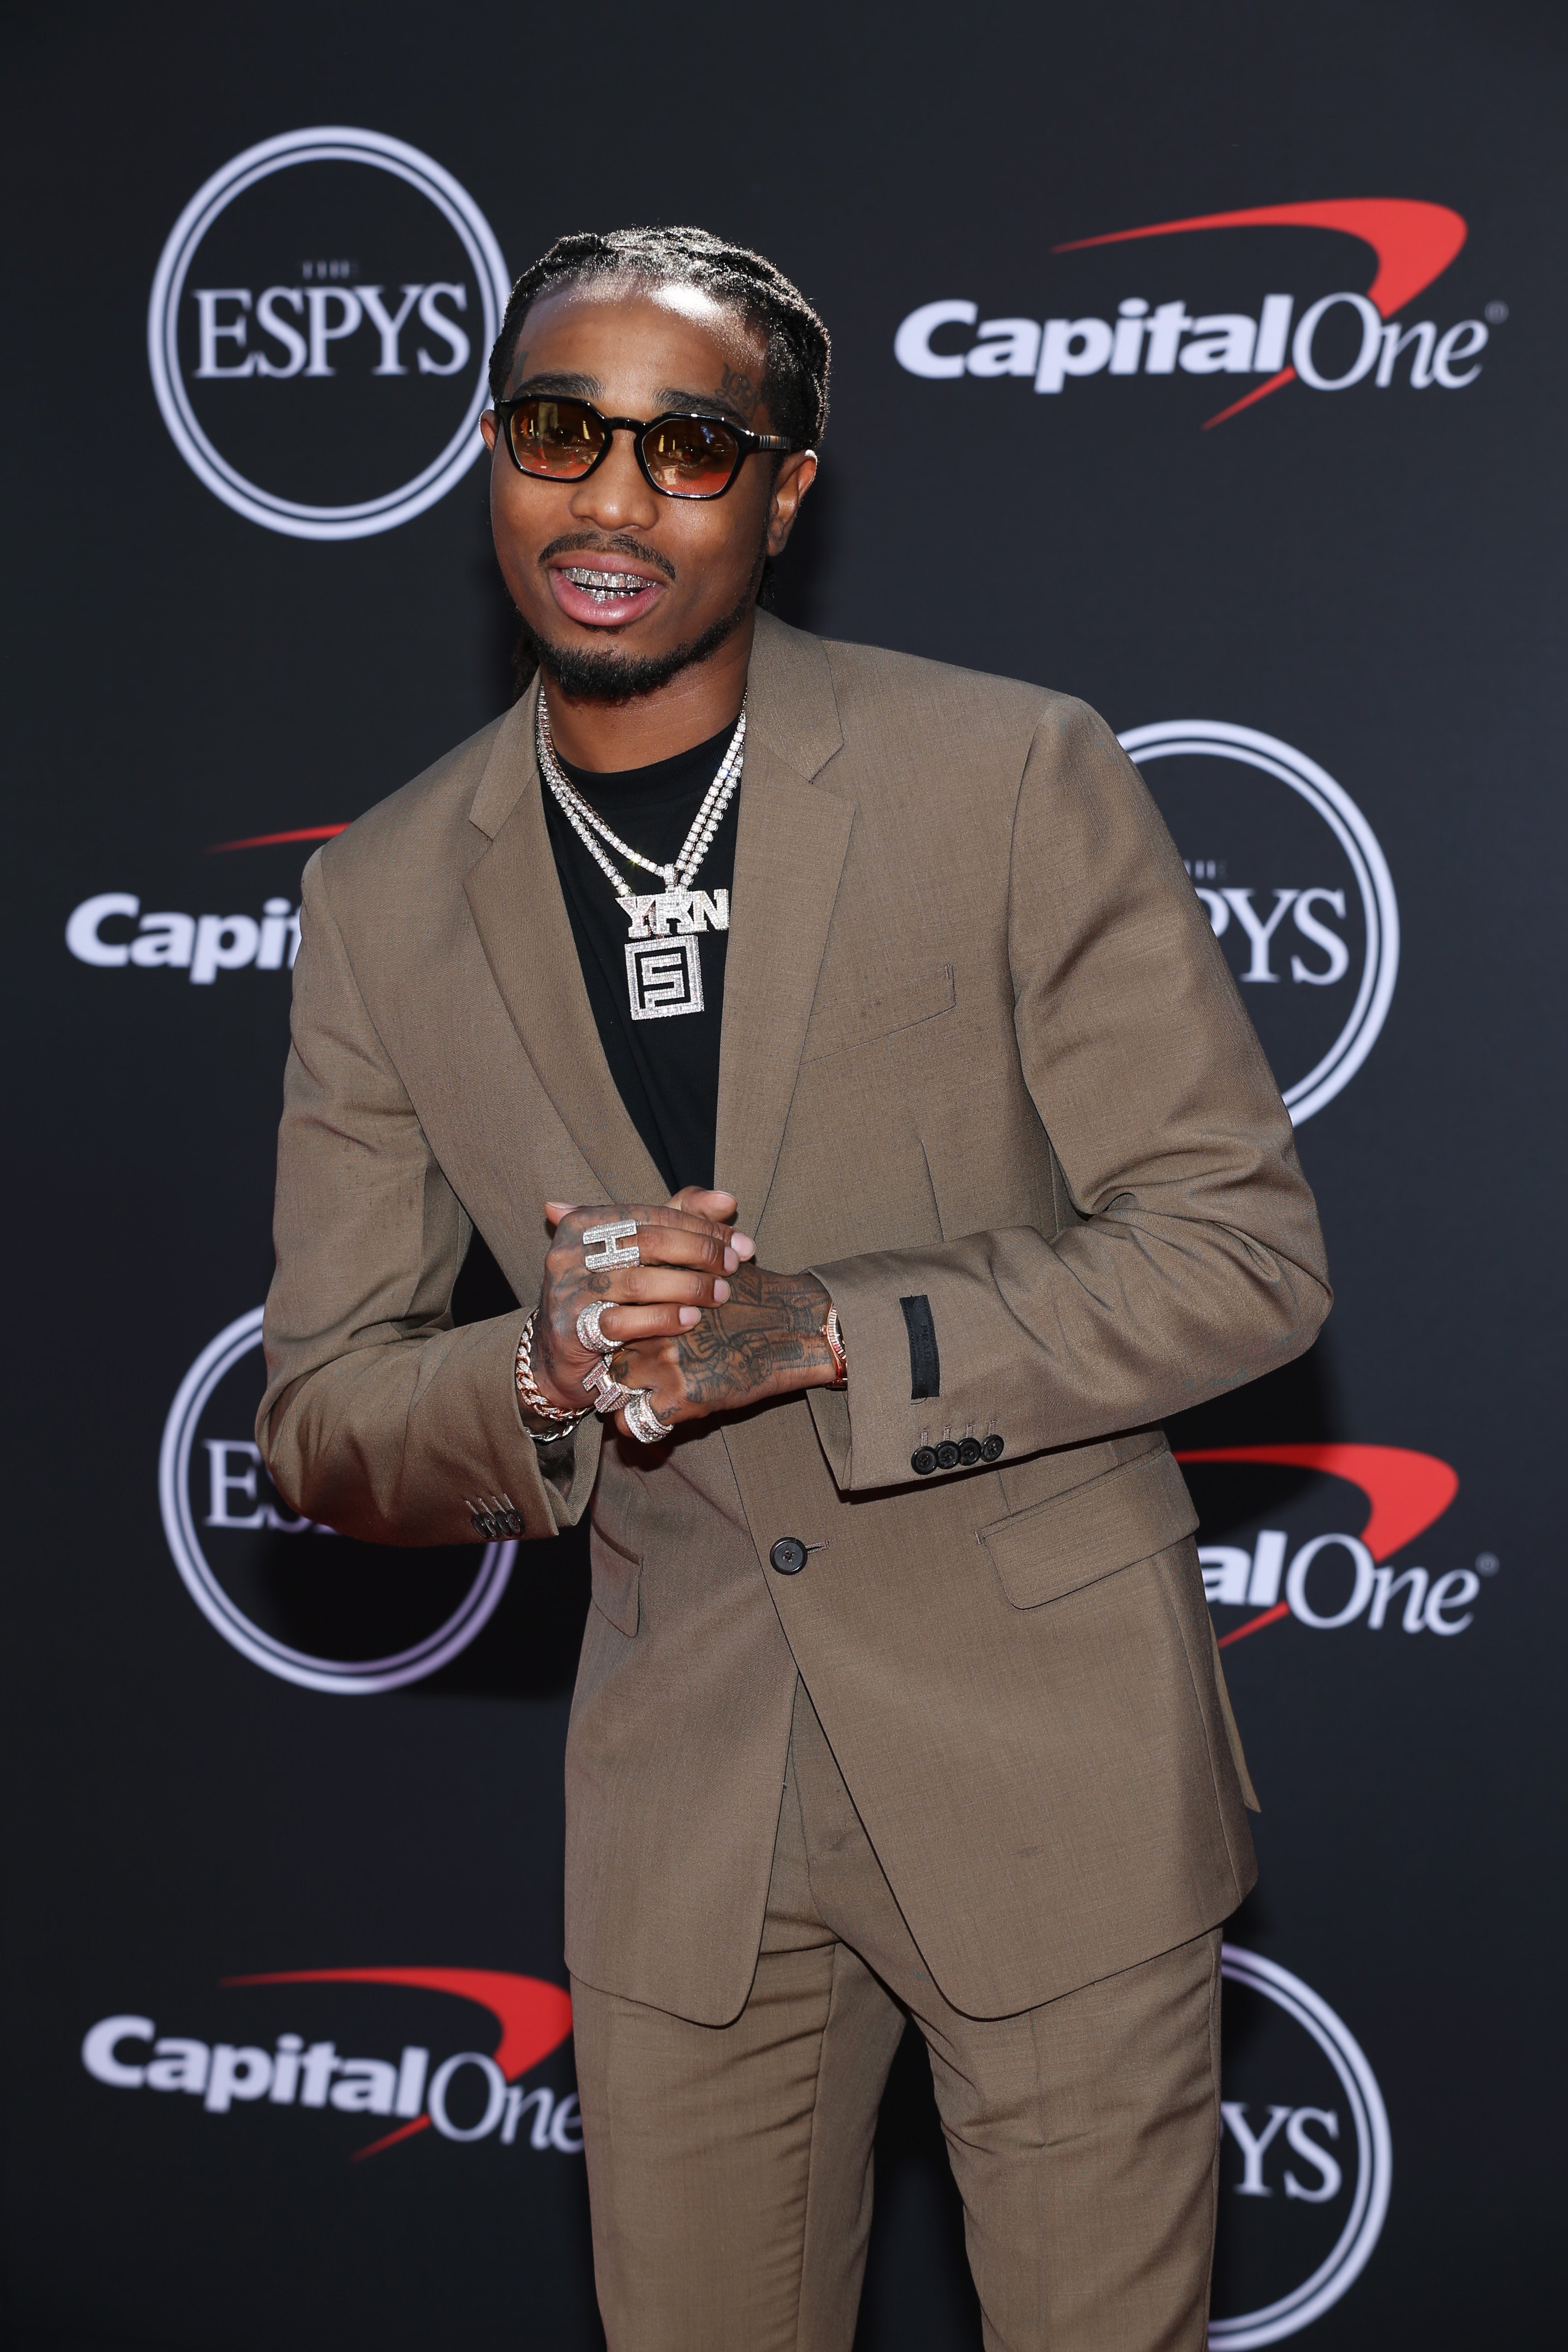 Blowouts, Braids and Locs Were The Styles Of Choice For This Years ESPYs